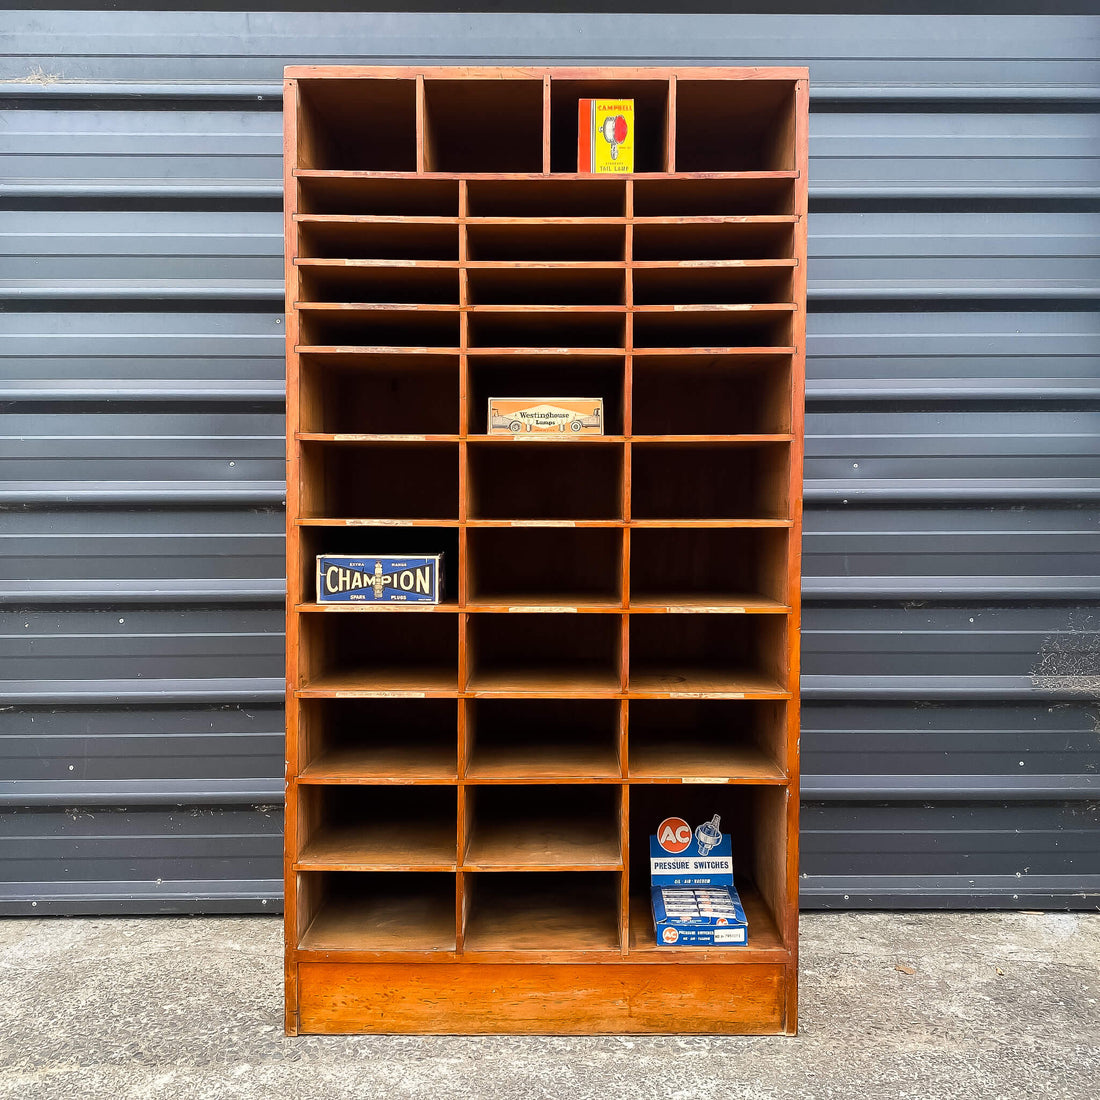 Industrial Pigeon Hole Cabinet